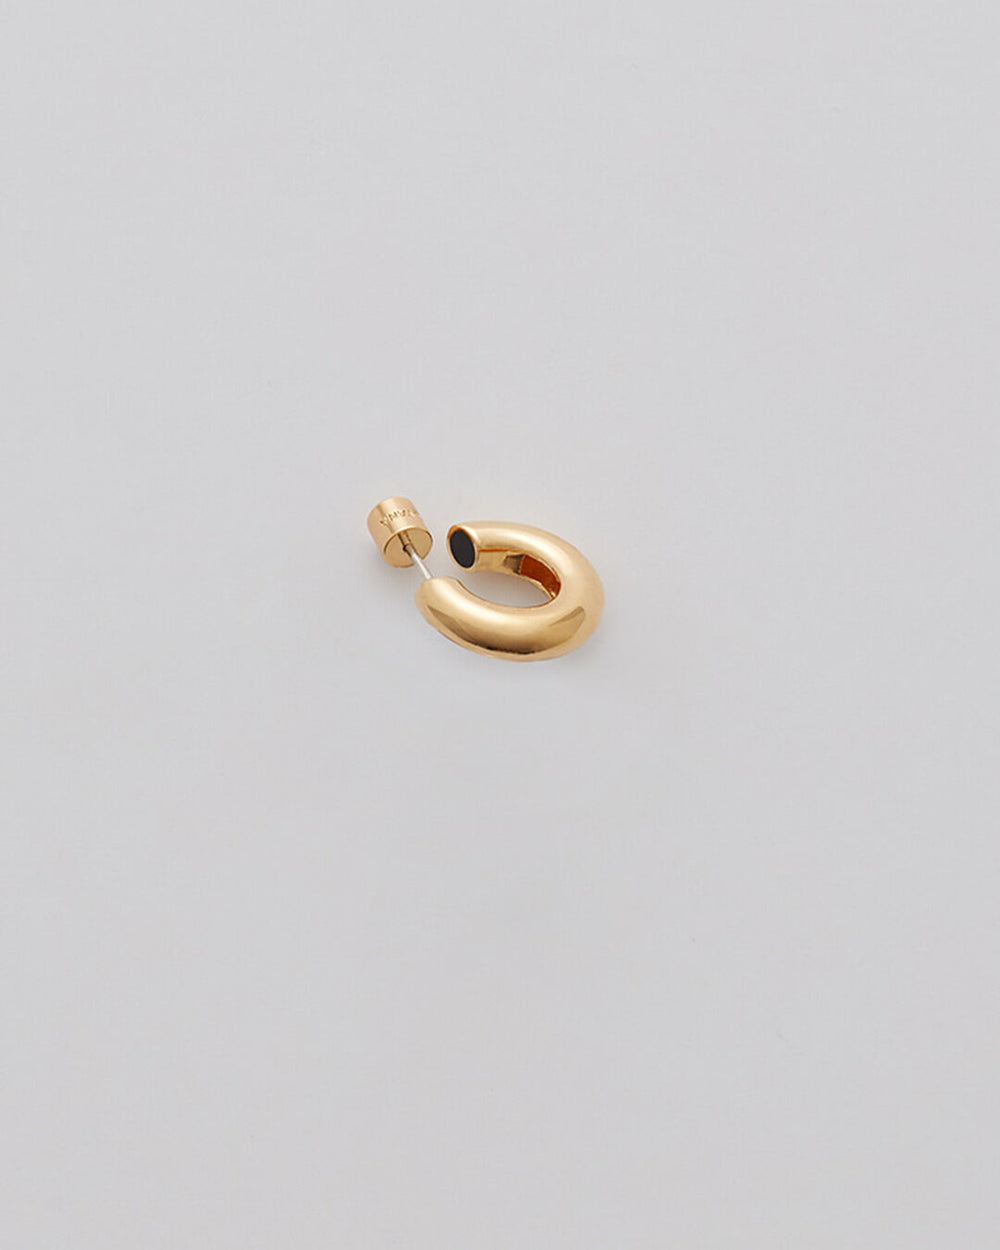 Earring in the shape of an abstract figure on a light background.